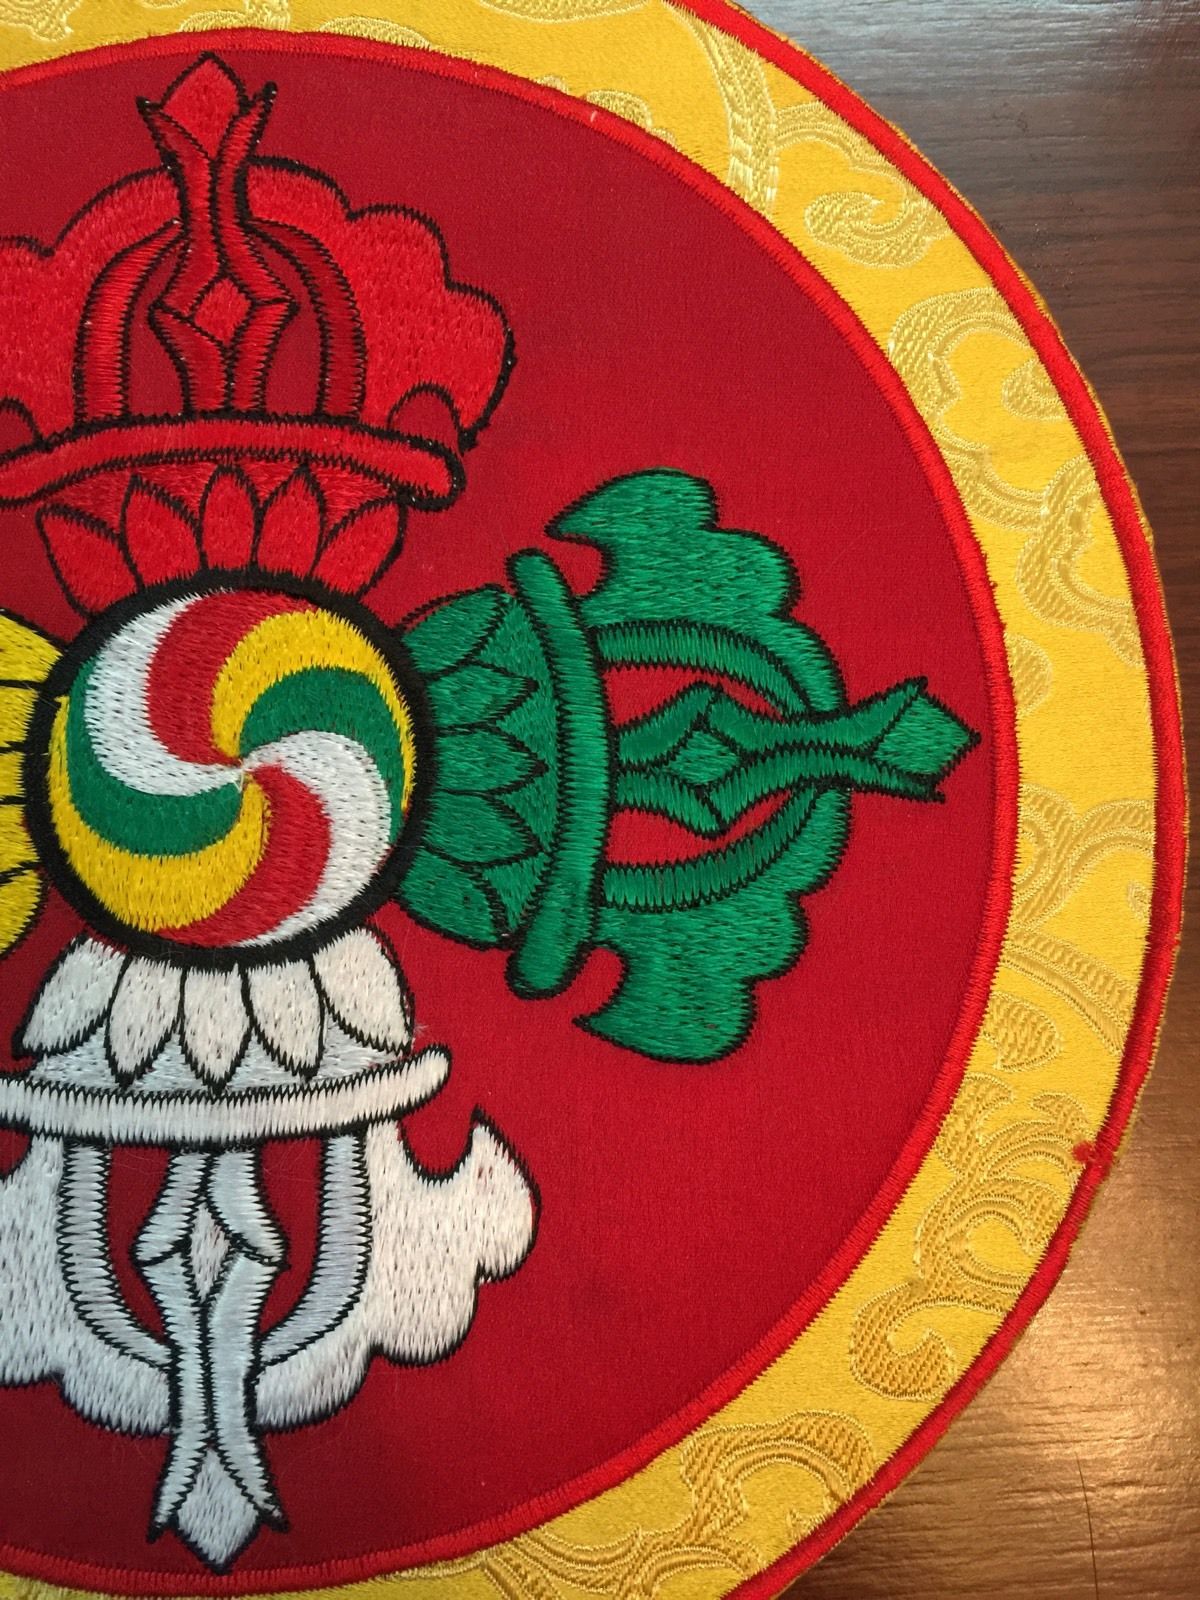 Tibetan Embroided Dorje Round Placemat/Table Cover